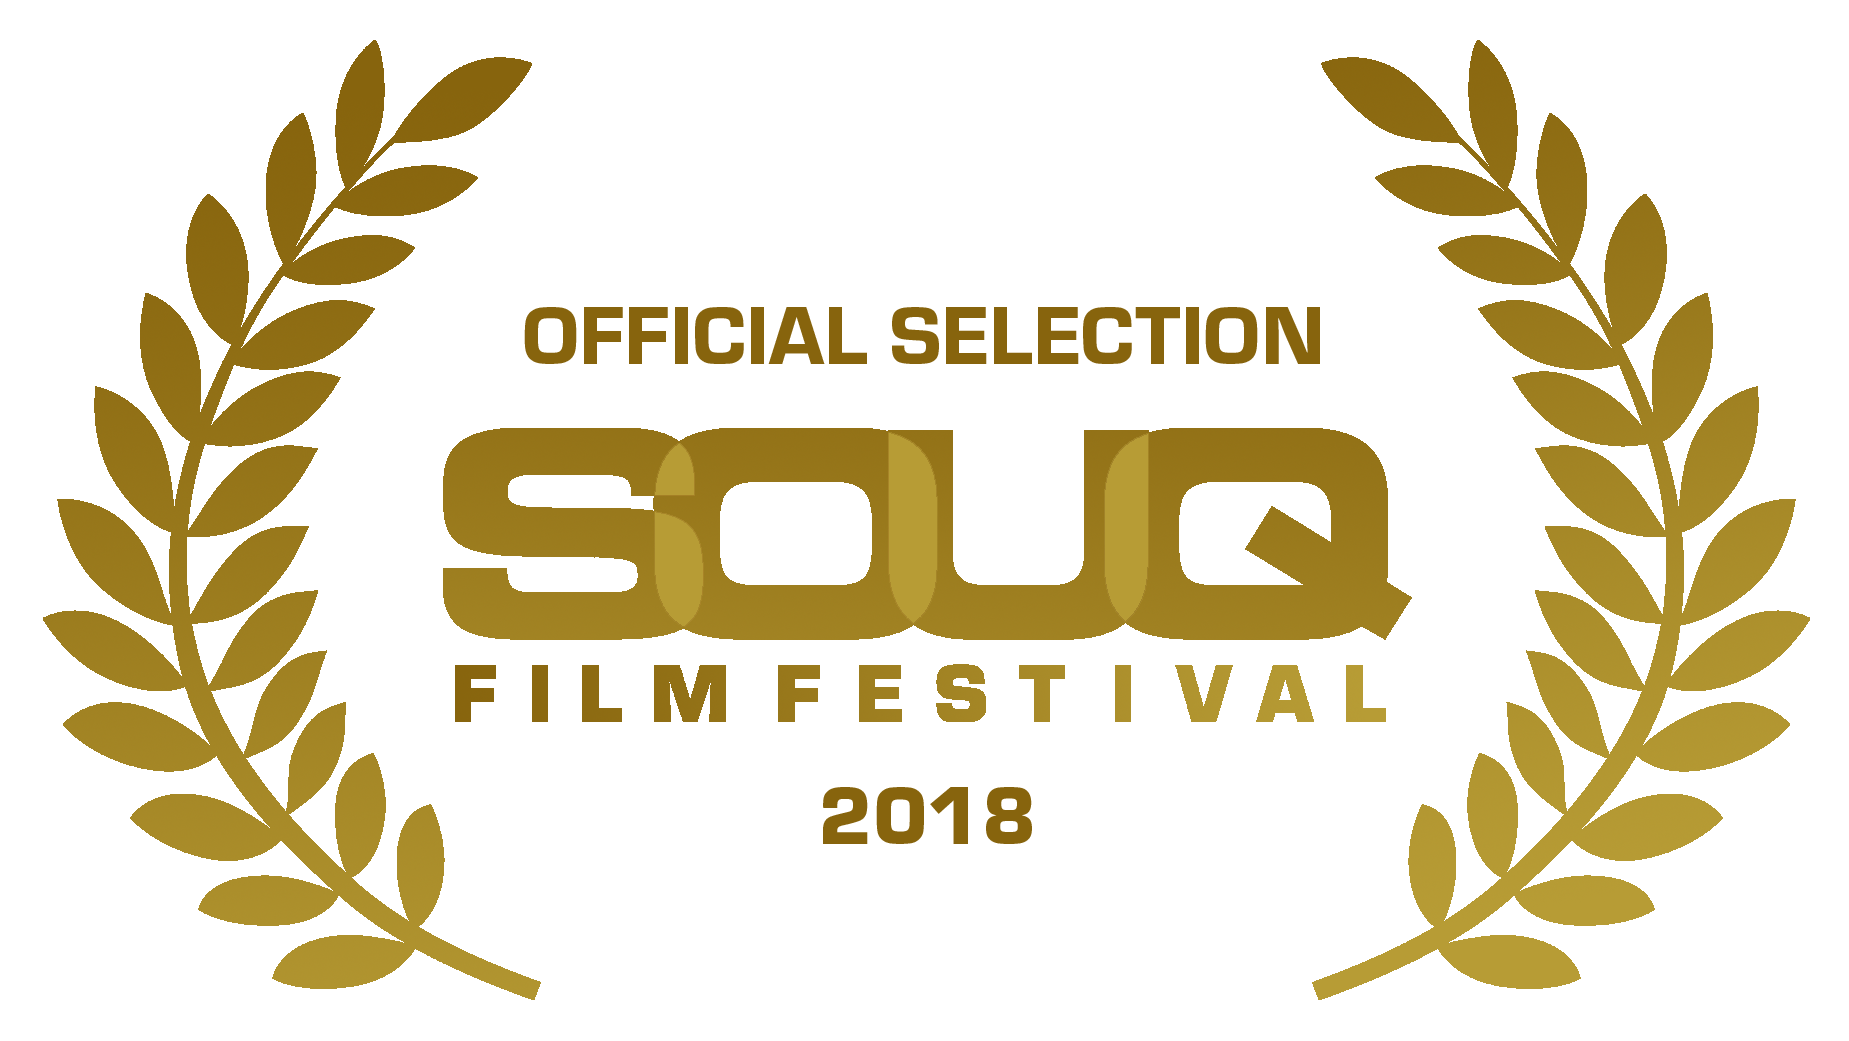 SFF 2018 - OFFICIAL SELECTION LOGO.png